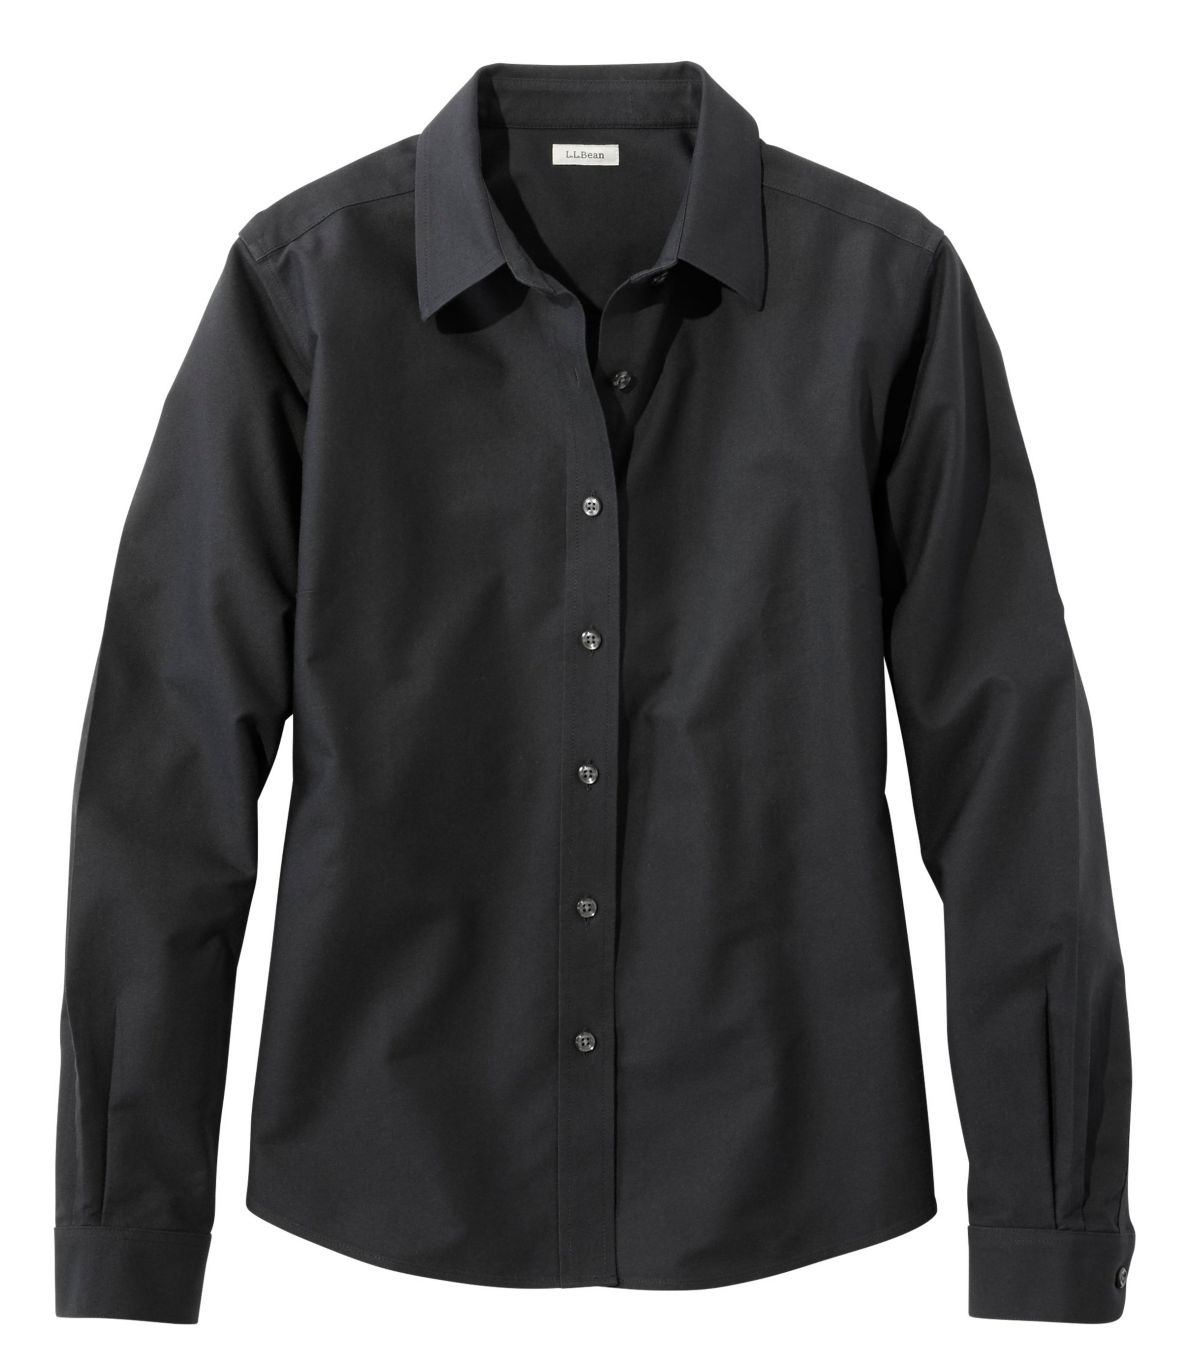 Long-Sleeve Wrinkle Resistant All Cotton Shirt Fit